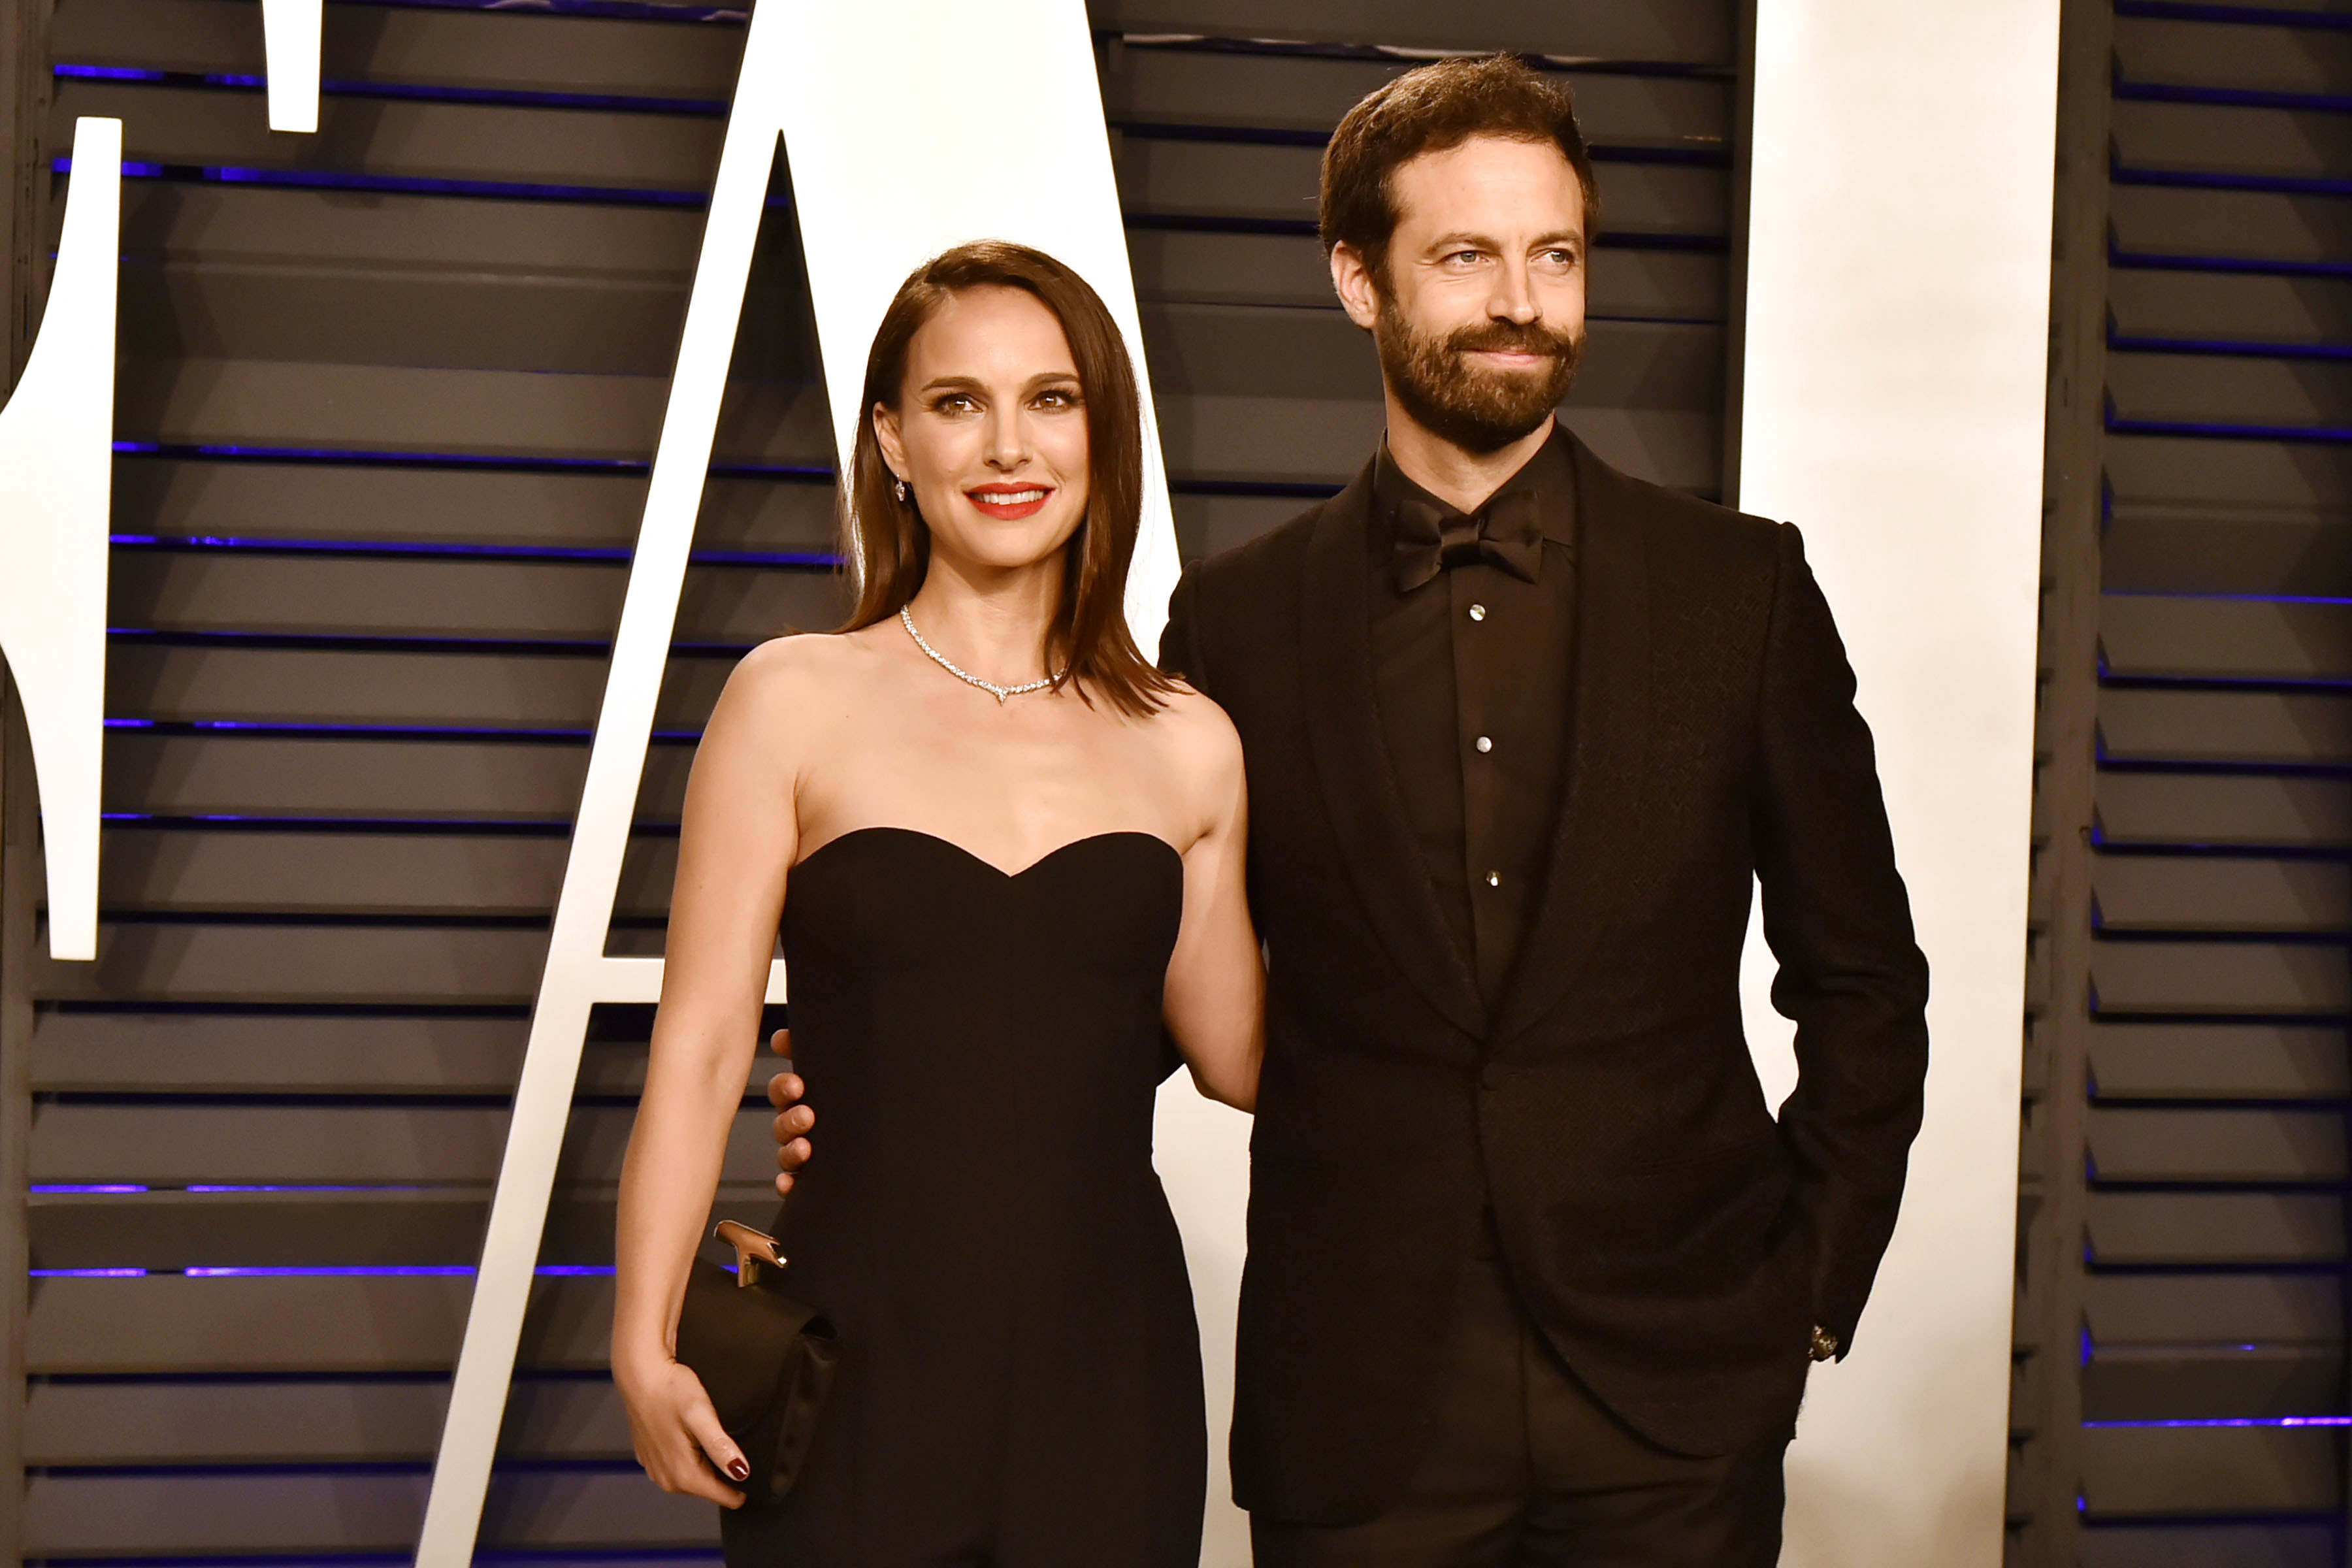 Natalie Portman and Benjamin Millepied in Beverly Hills, California on February 24, 2019 | Source: Getty Images